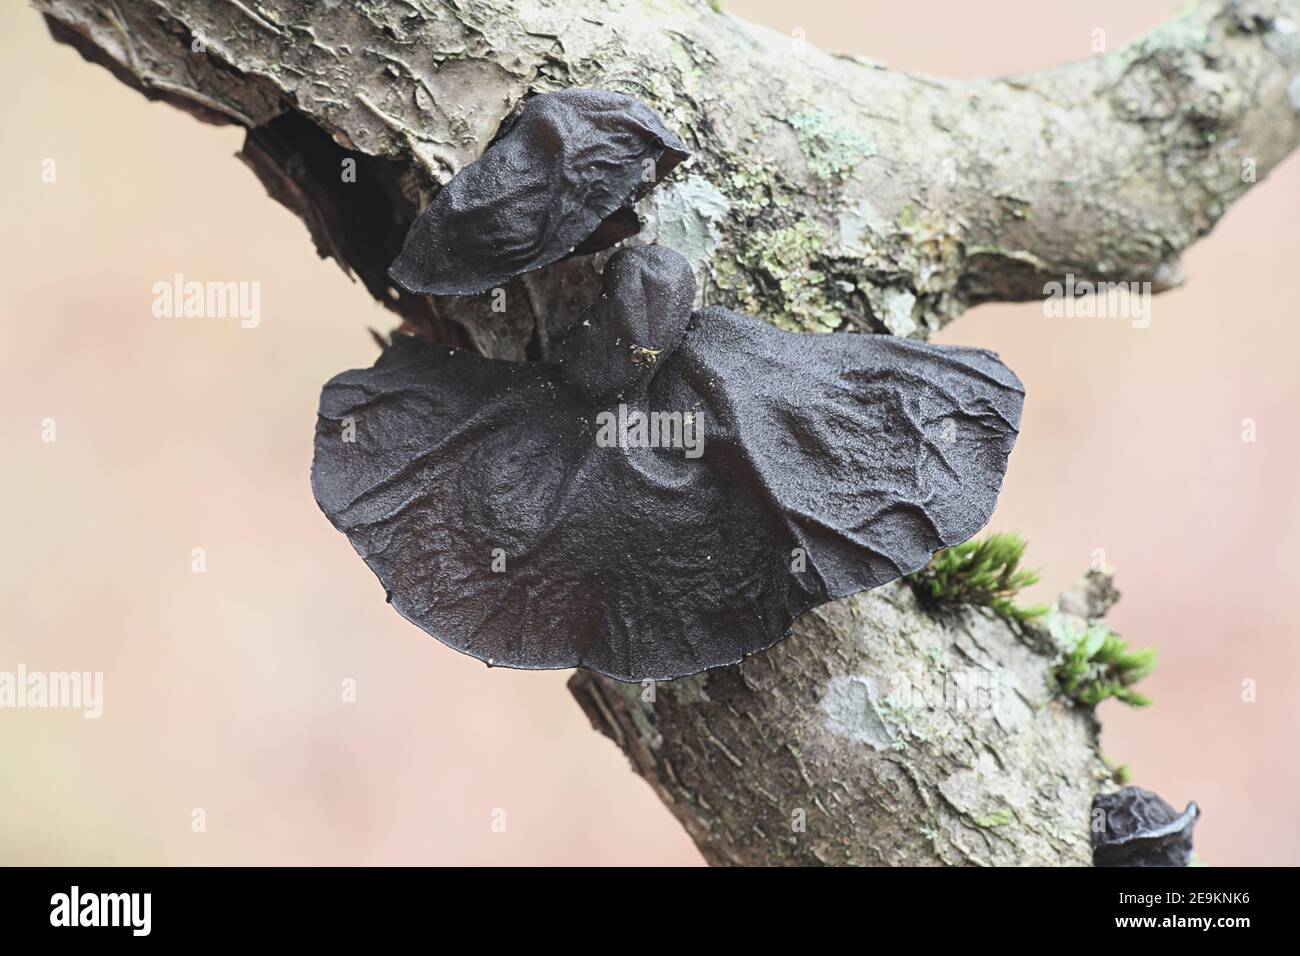 Exidia glandulosa, known as Black Witches Butter or jelly drop, wild fungus from Finland Stock Photo